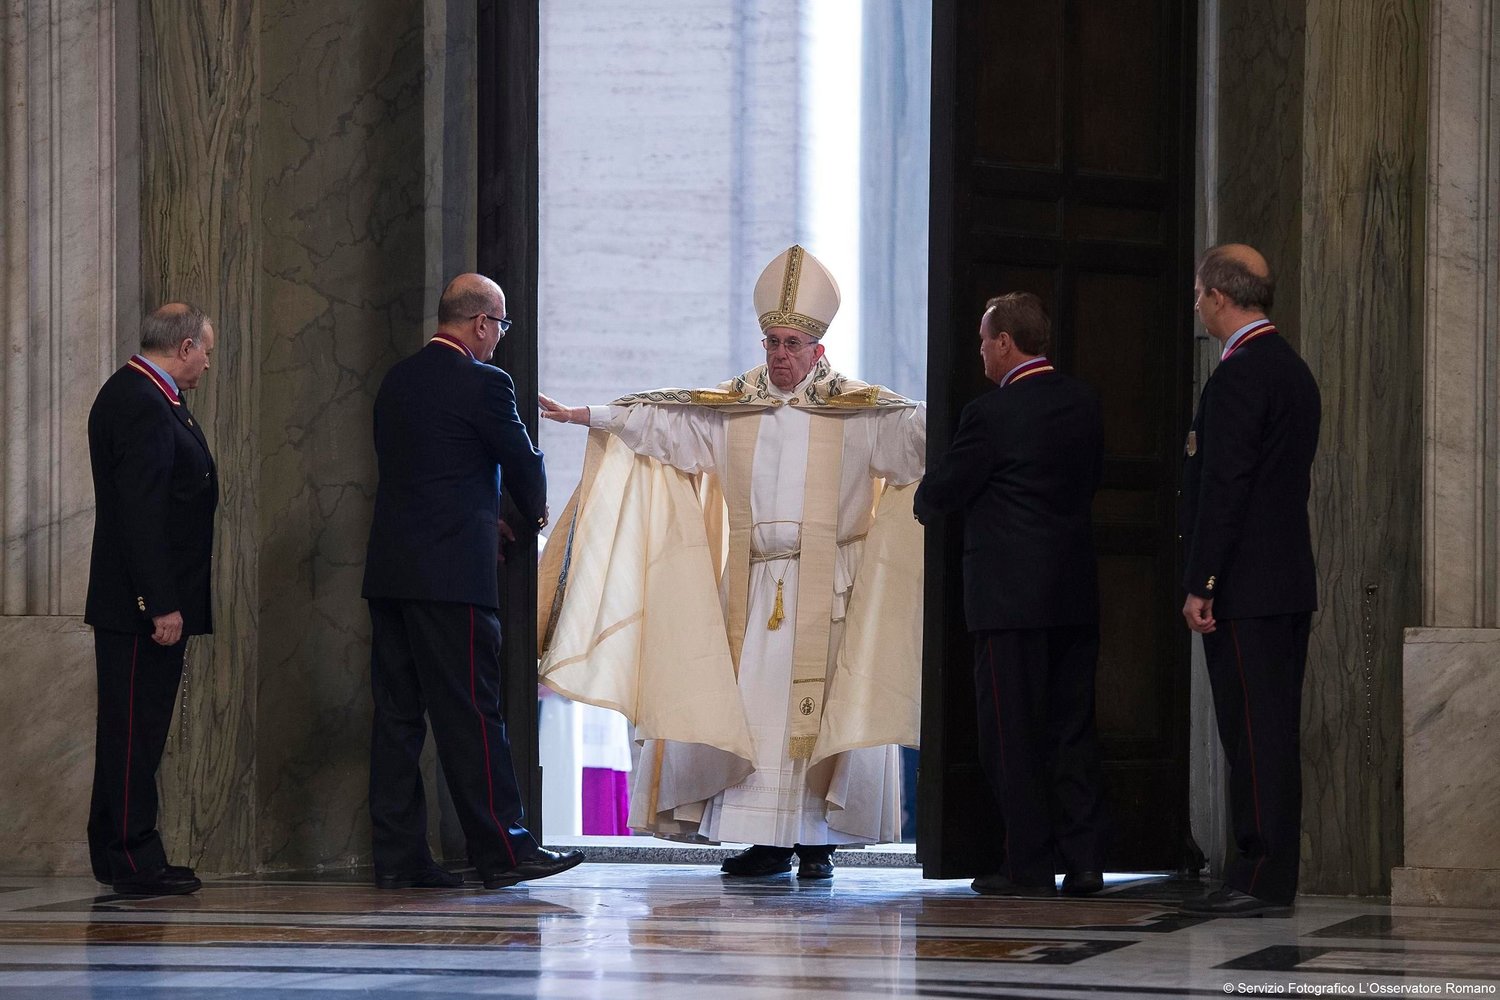 In this 2015 file photo, Pope Francis opens the Holy Door of St. Peter’s Basilica to inaugurate the Jubilee Year of Mercy at the Vatican. Preparations for the Holy Year 2025 have already begun.